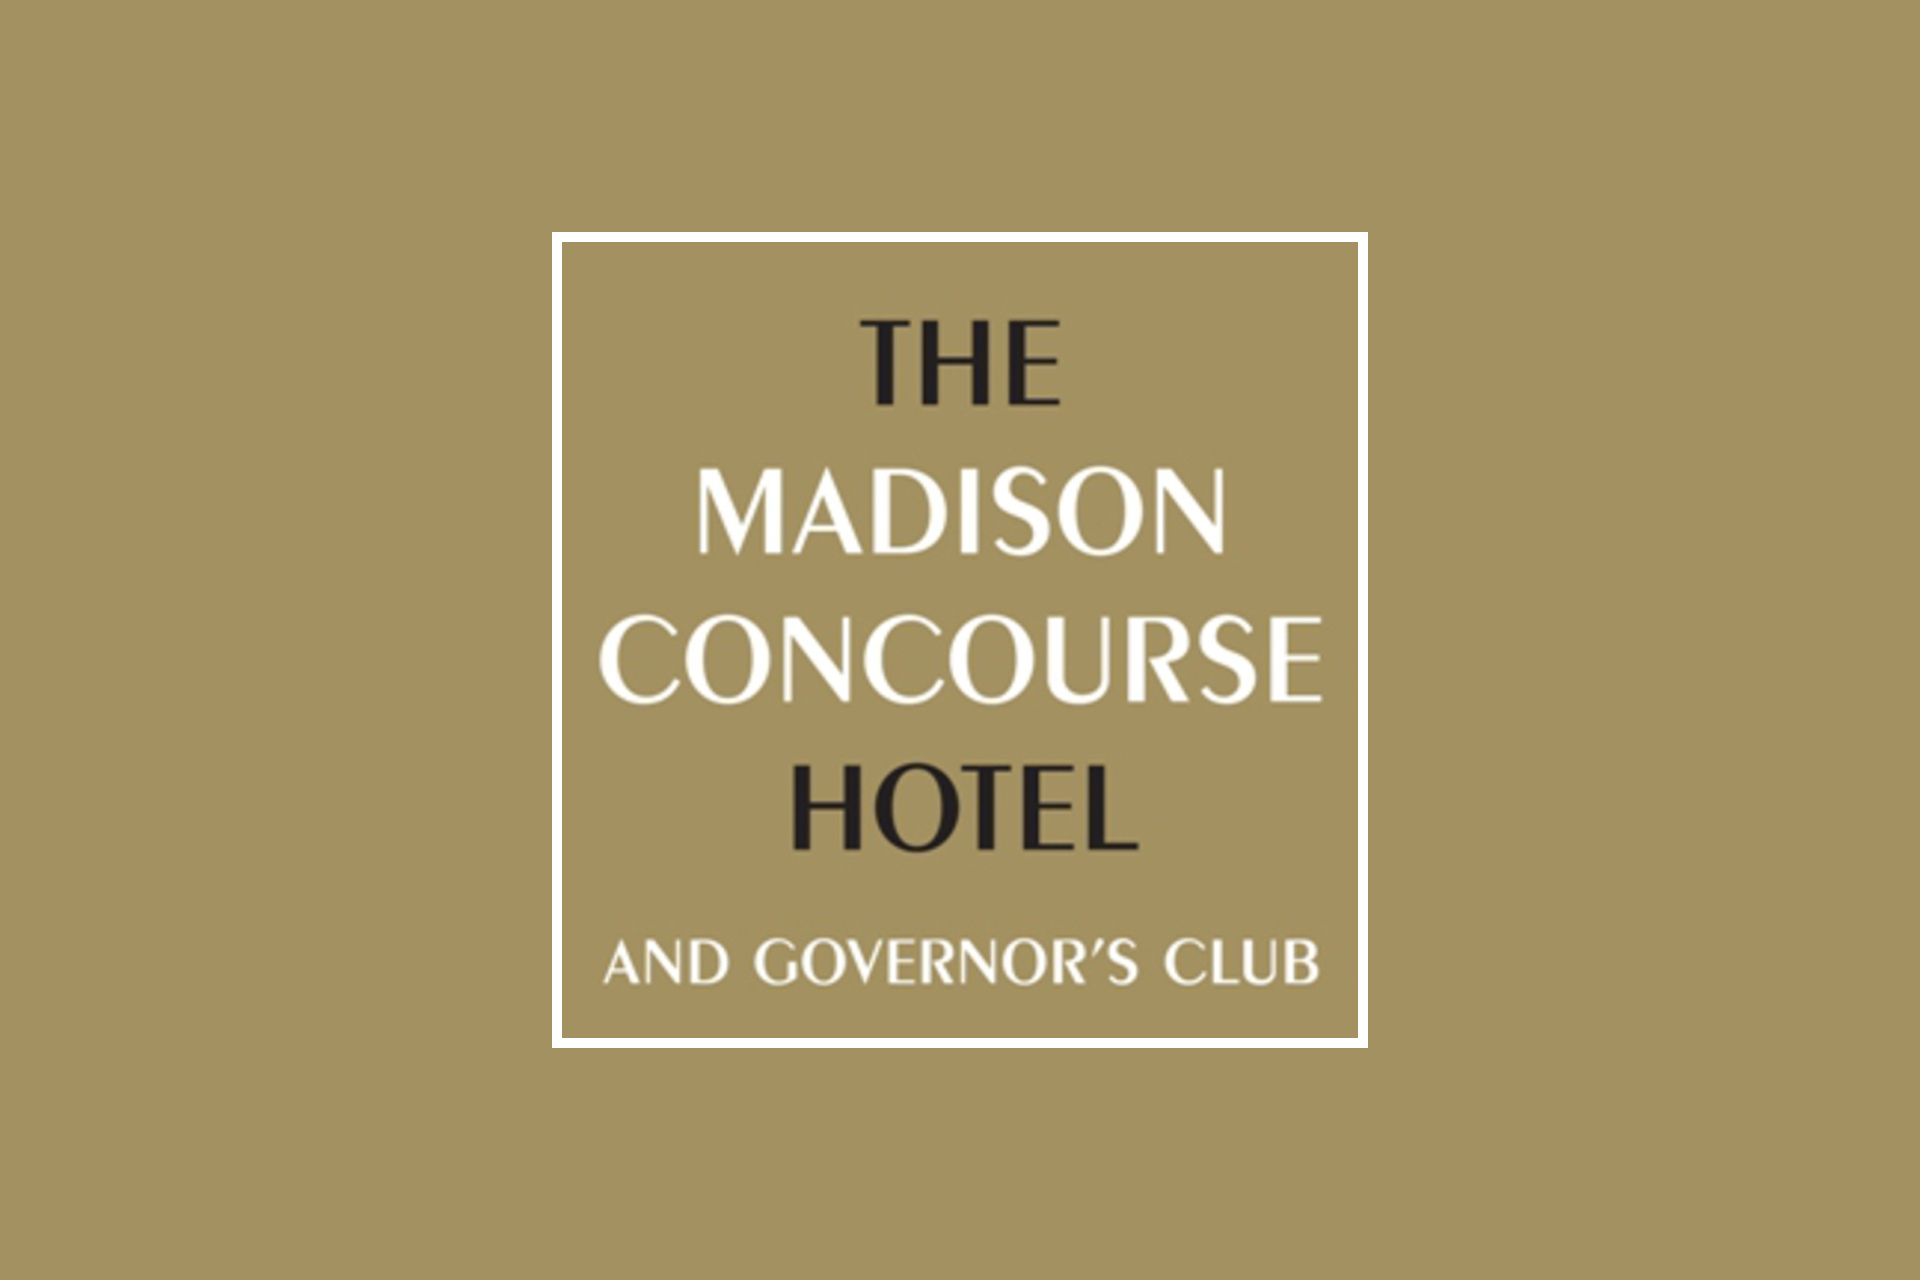 The Madison Concourse Hotel